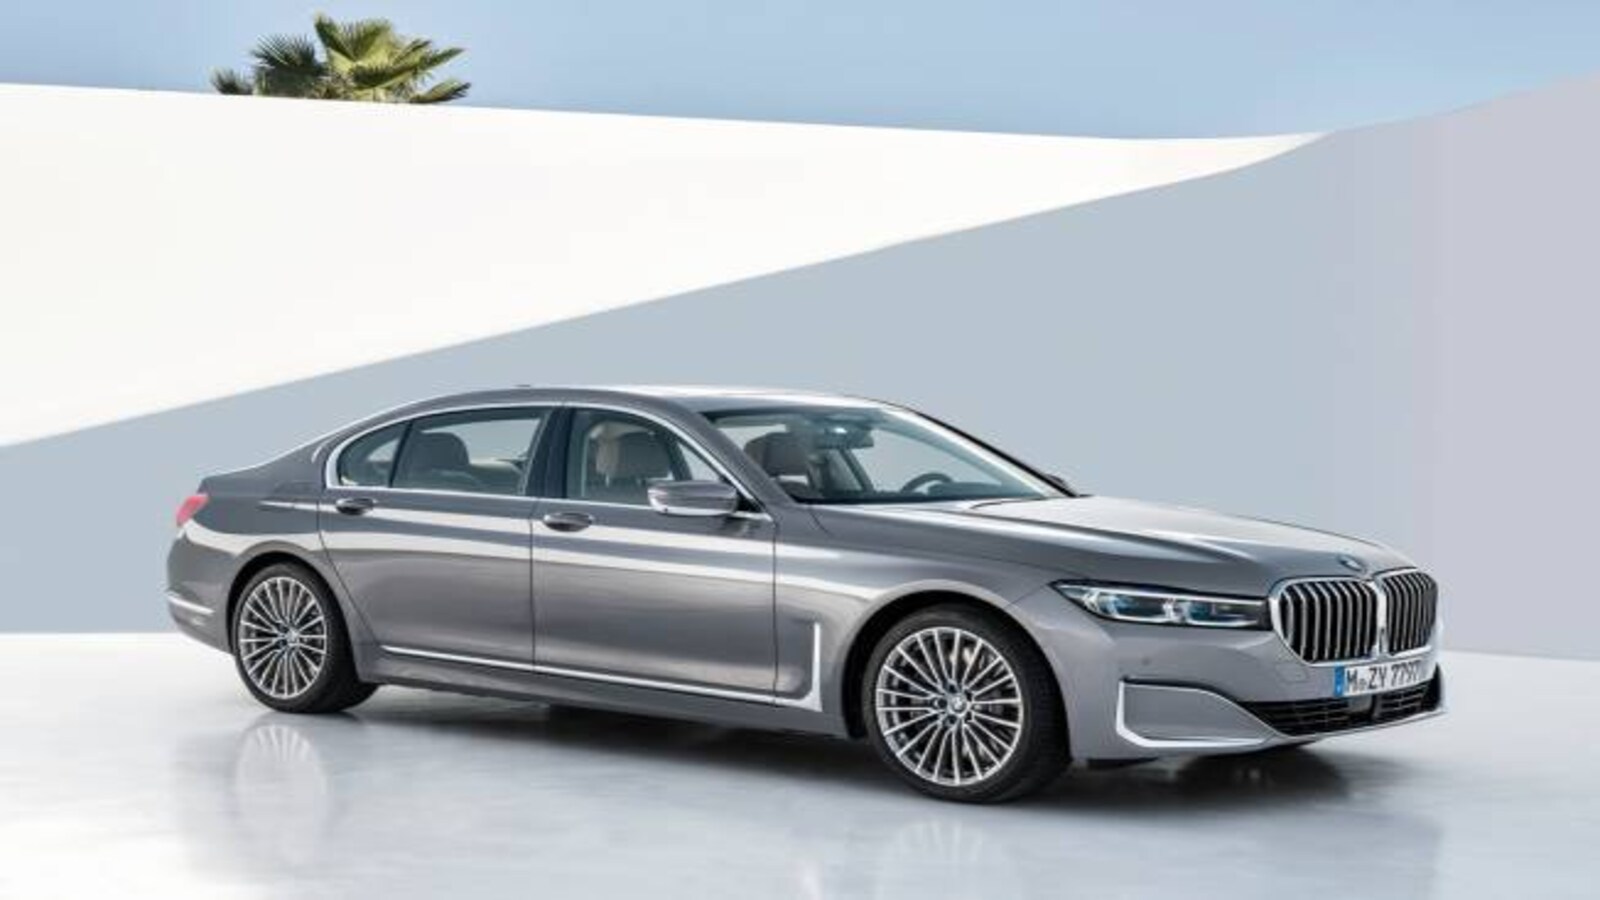 BMW 7 Series facelift launched: All you should know